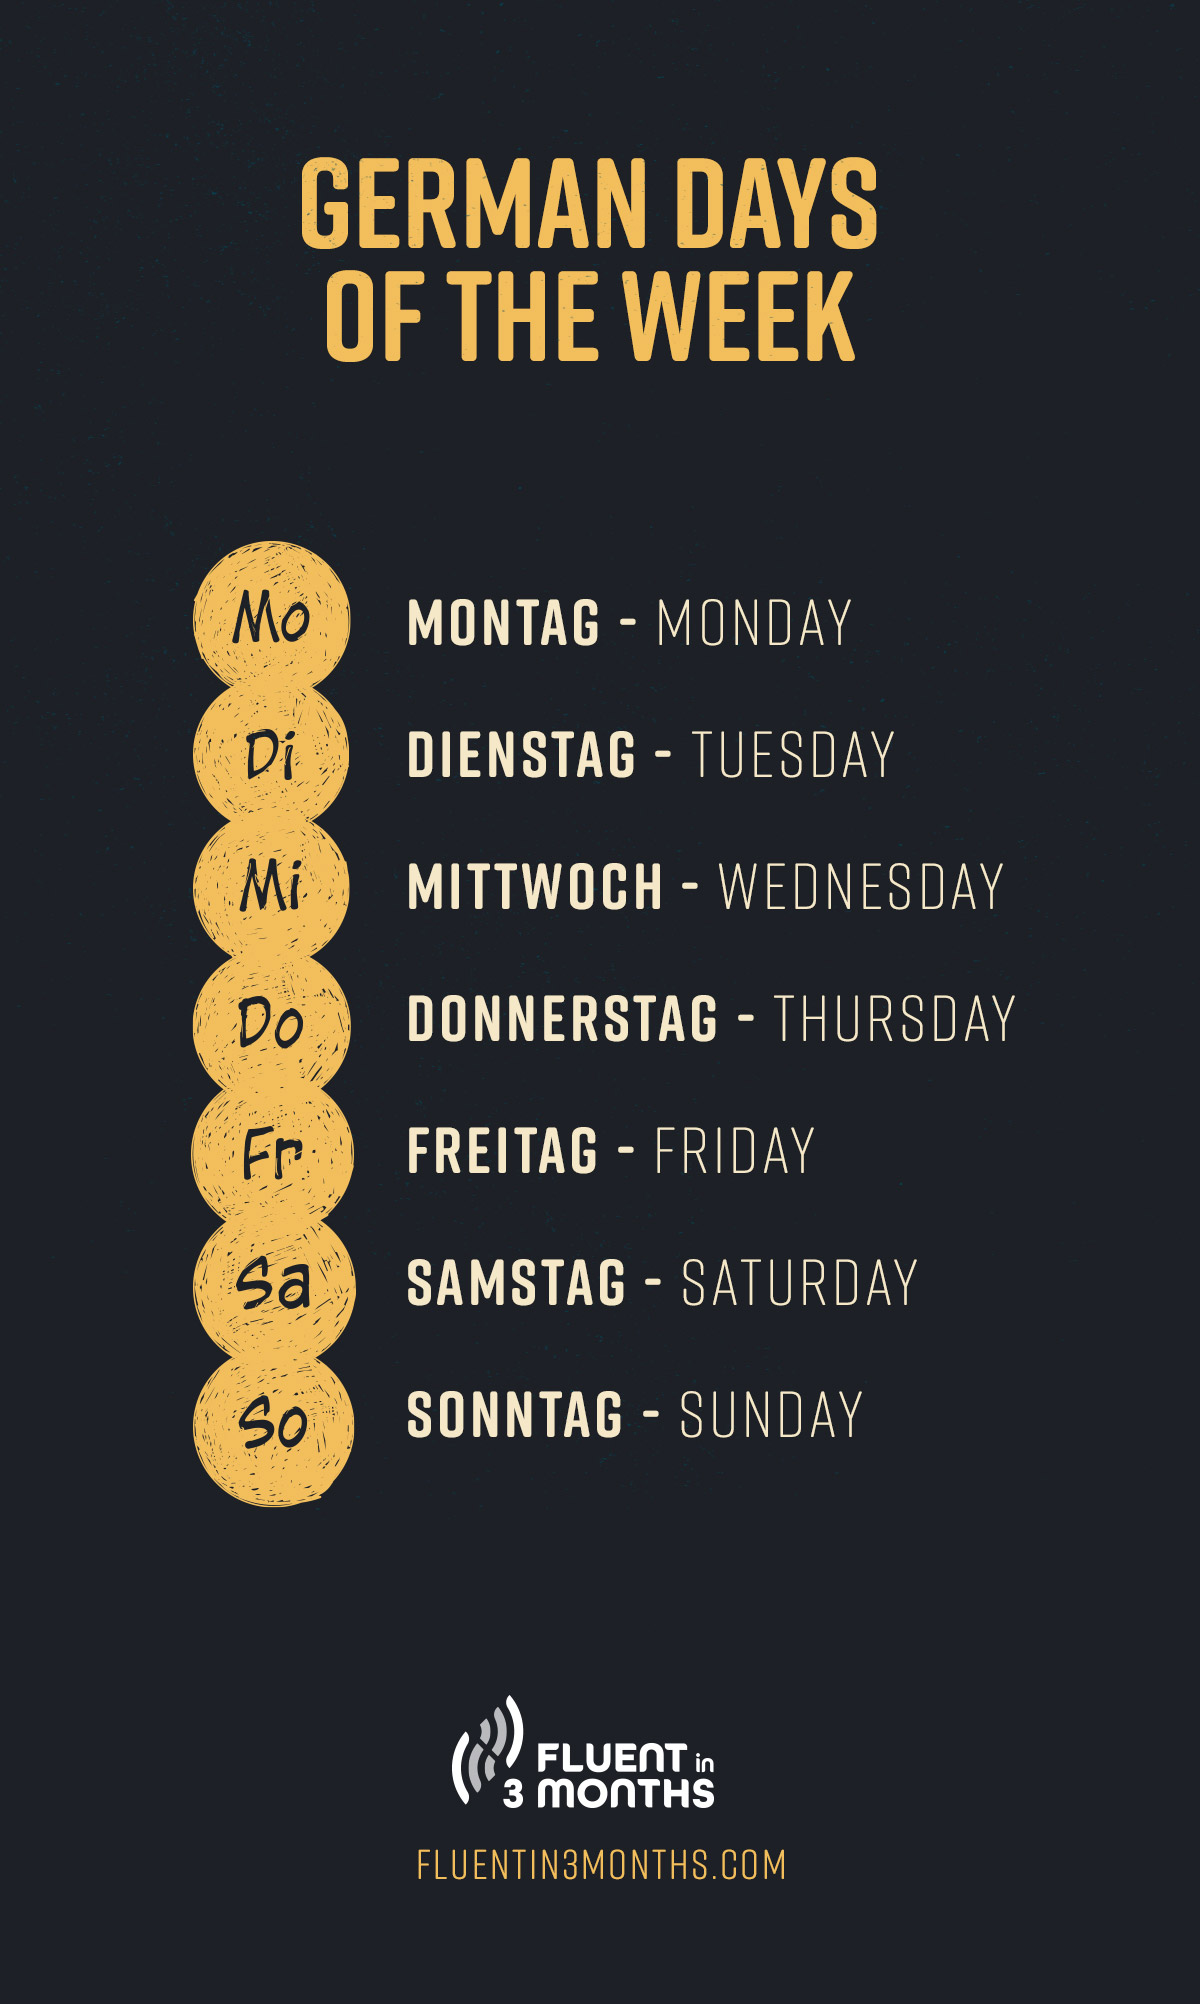 Days of the Week in German & Easy Ways to Remember Them